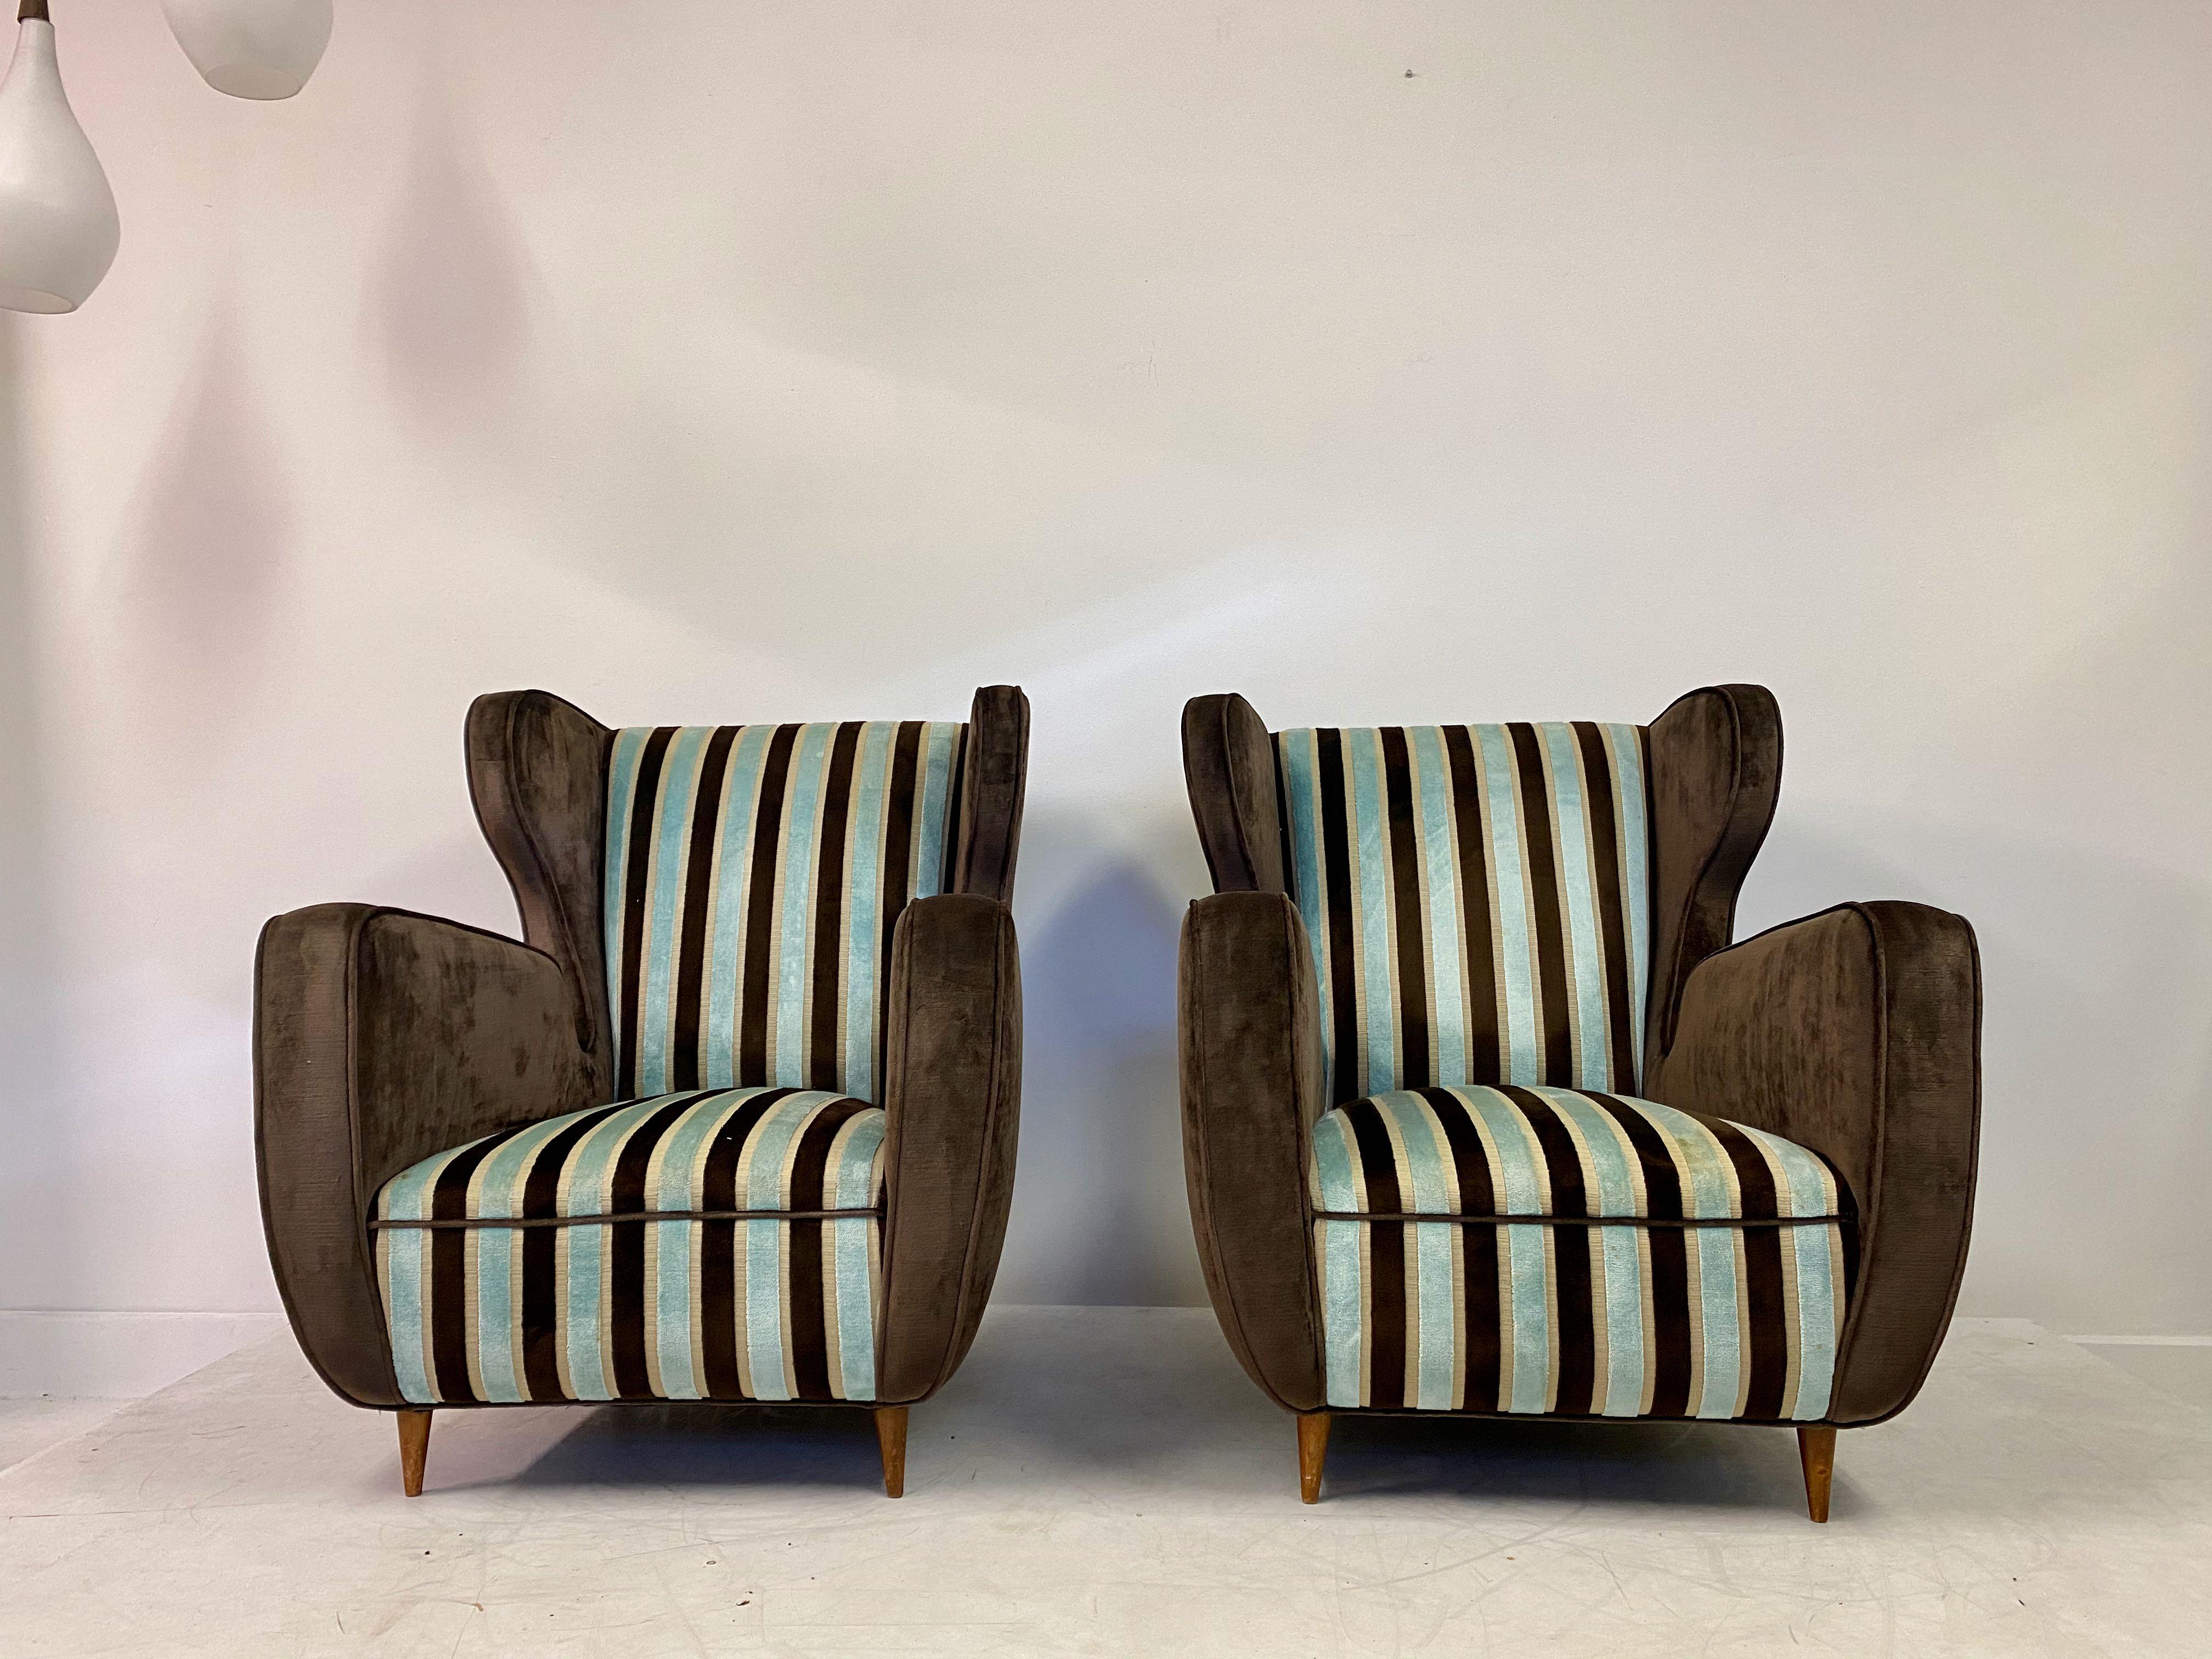 Pair of armchairs

Large scale

Walnut legs

Italian, 1950s

Measure: Seat height 37cm

Re-upholstered within the last ten years. Some small stains.